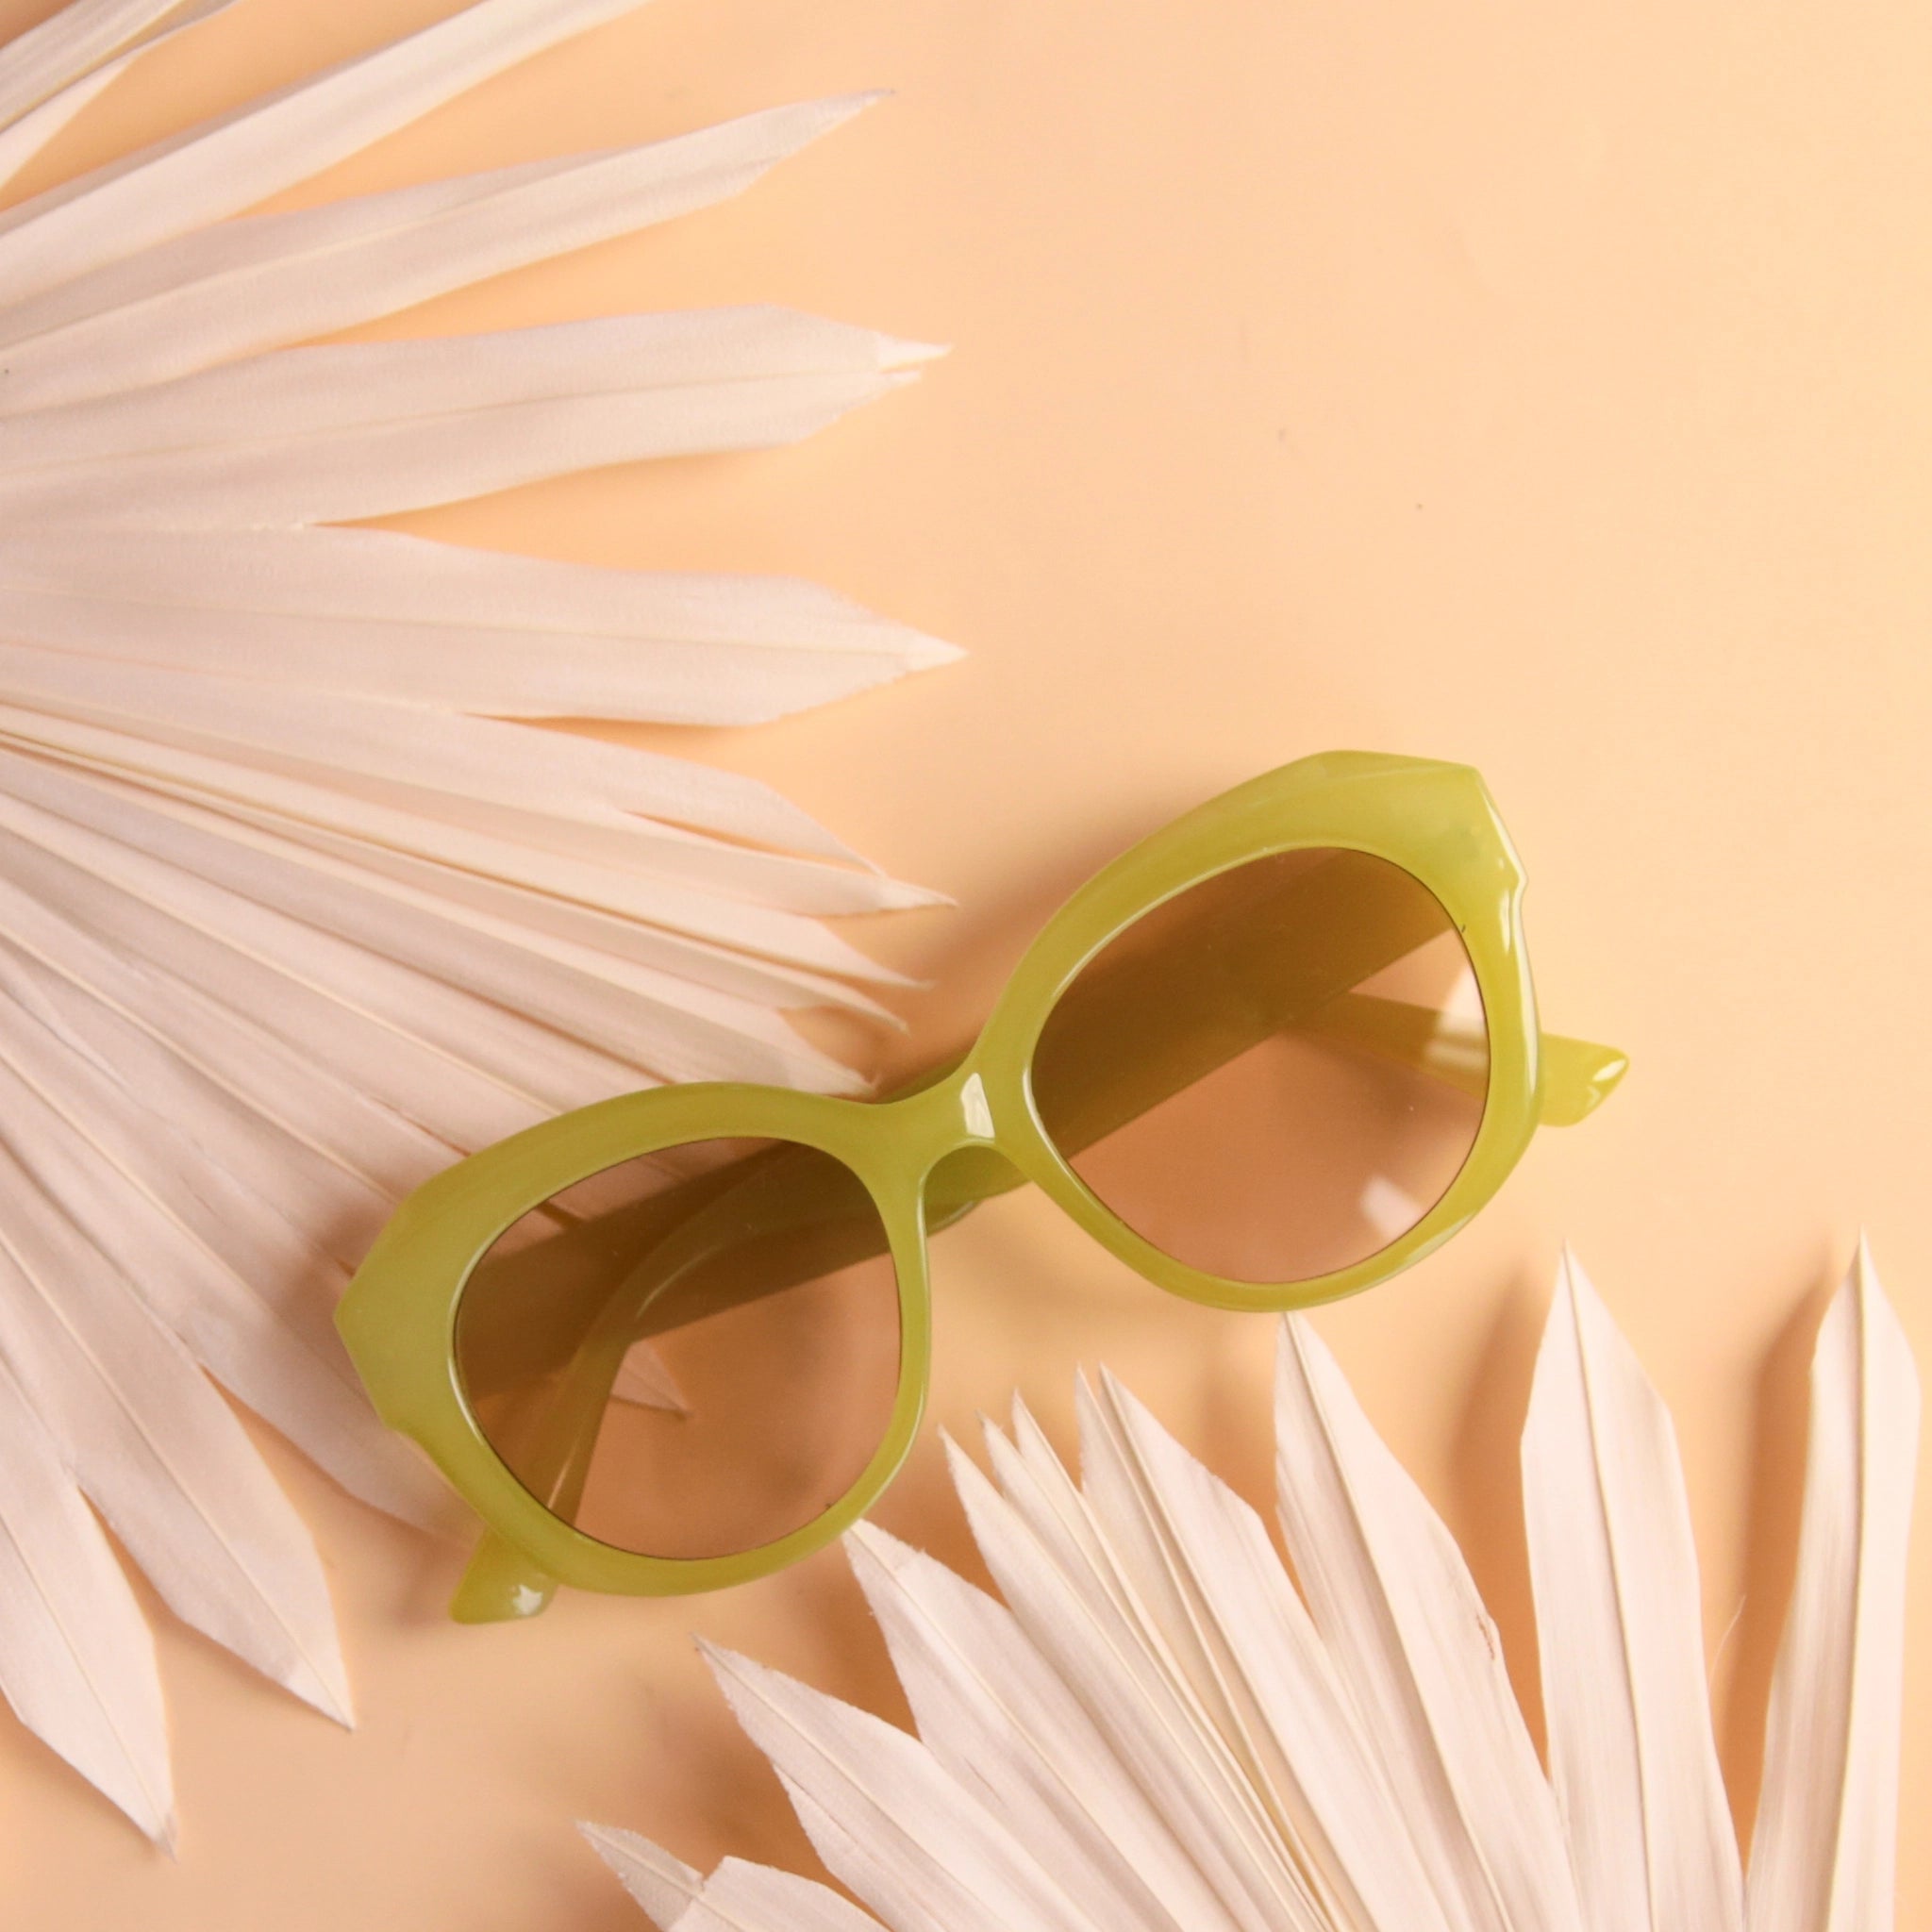 On a peachy background is a round pair of light green sunglasses with a light brown lens.